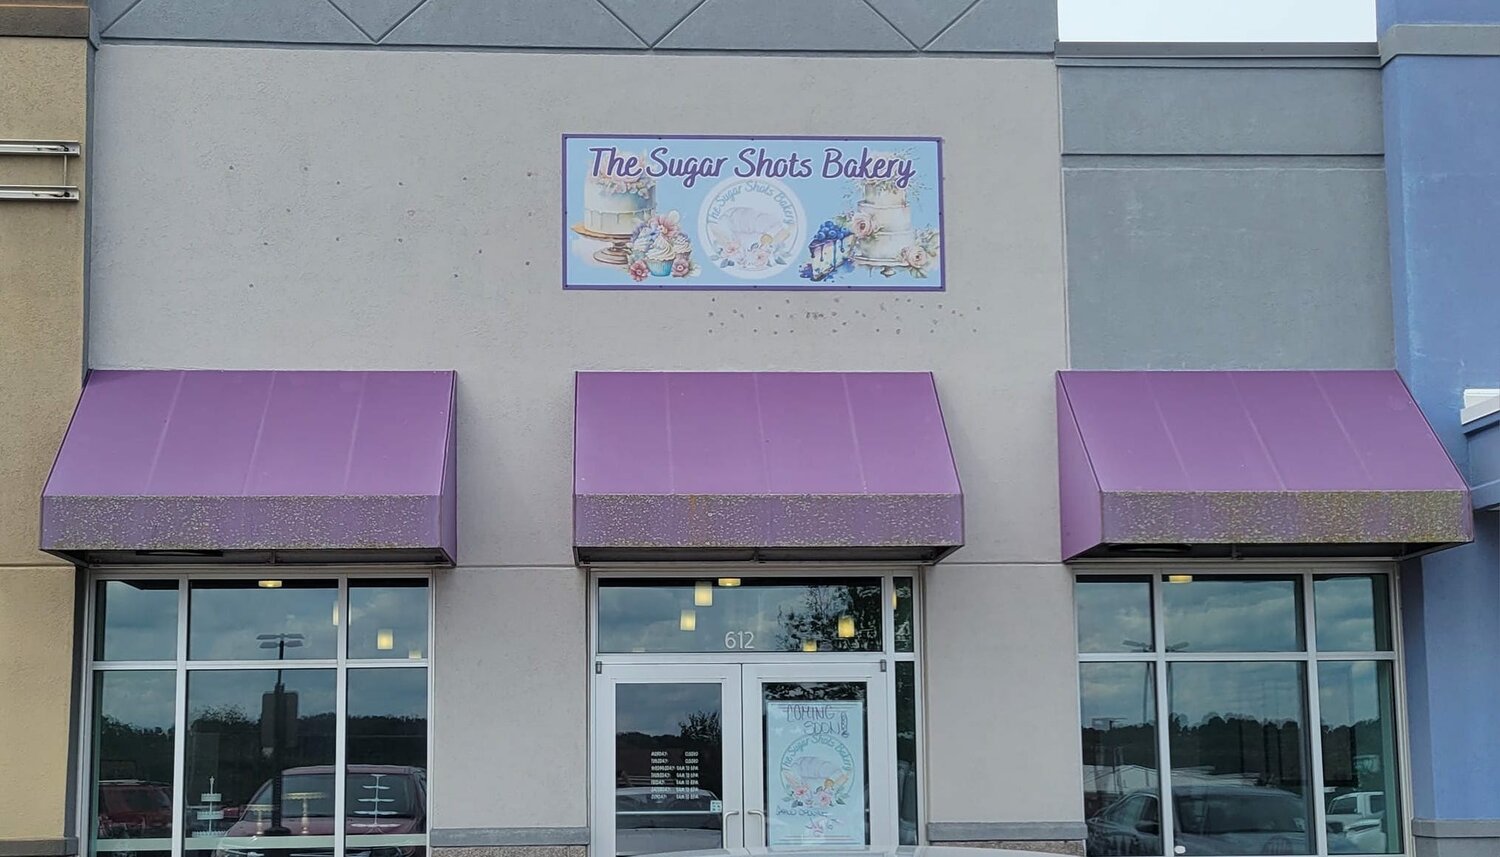 The Sugar Shots Bakery is next door to B&B Theatres at 612 N. 25th St. in Ozark.